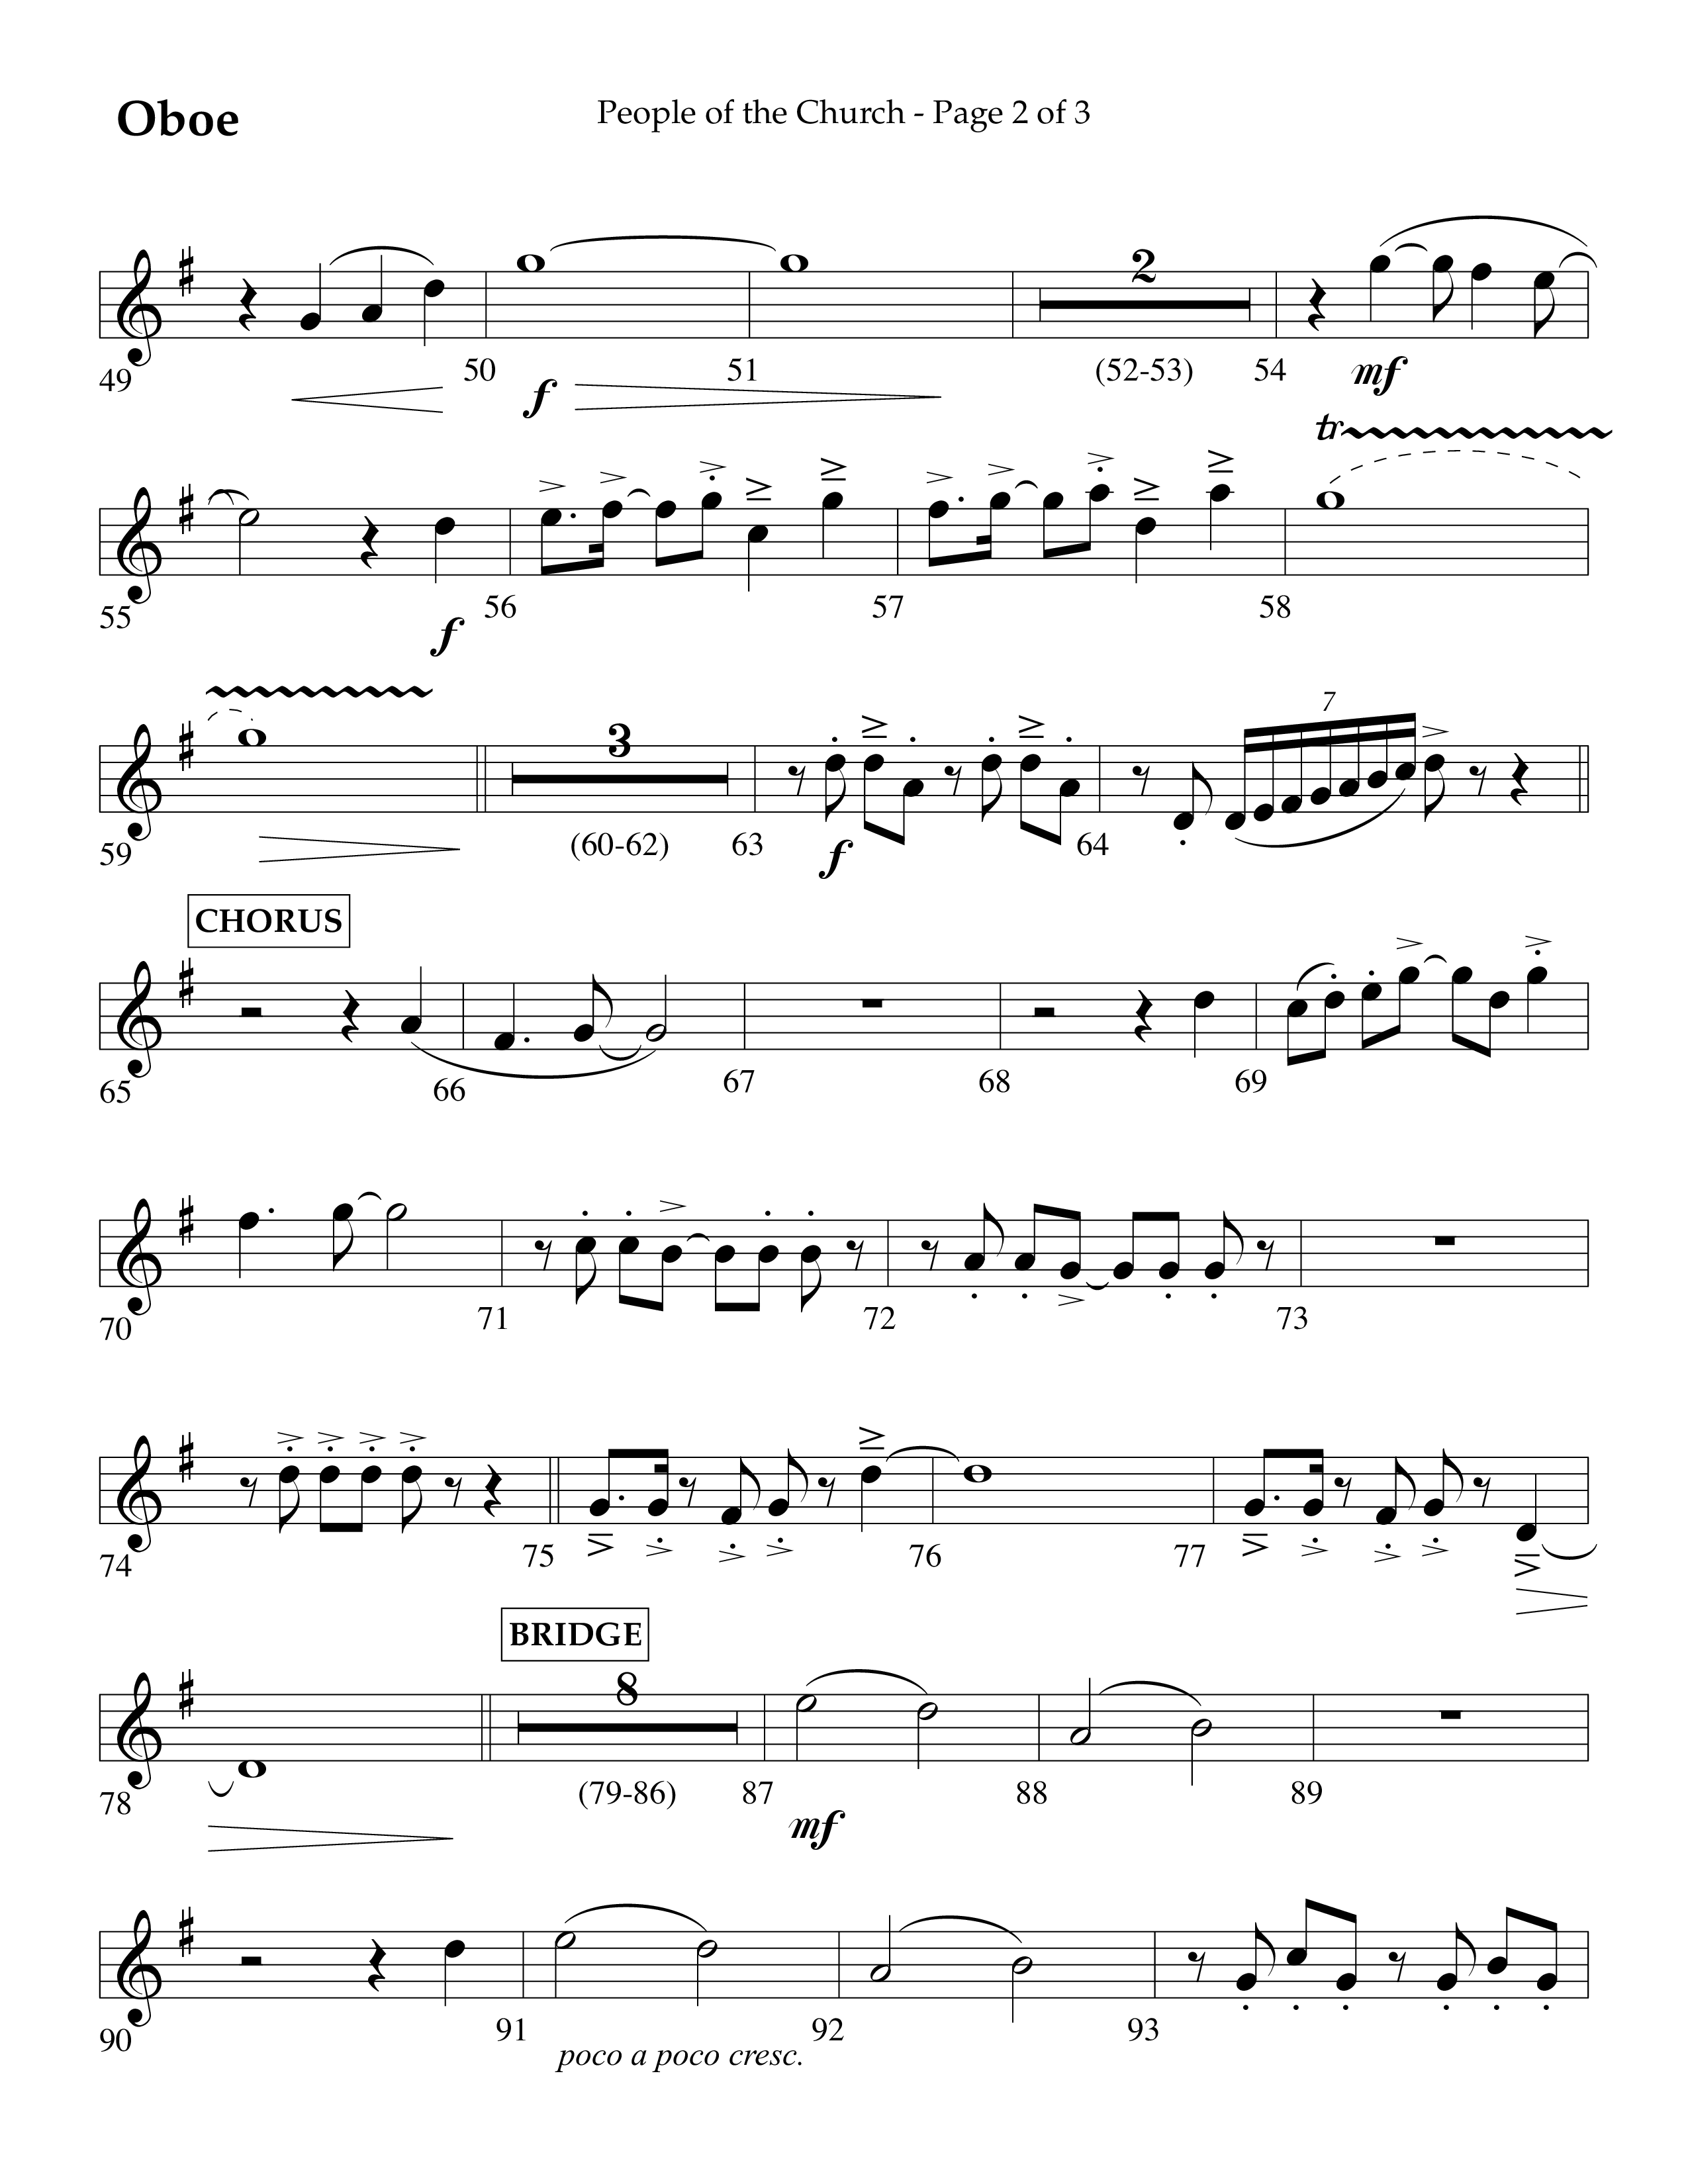 People Of The church (Choral Anthem SATB) Oboe (Lifeway Choral / Arr. Eric Belvin / Arr. John Bolin / Arr. Don Koch / Orch. Danny Mitchell)